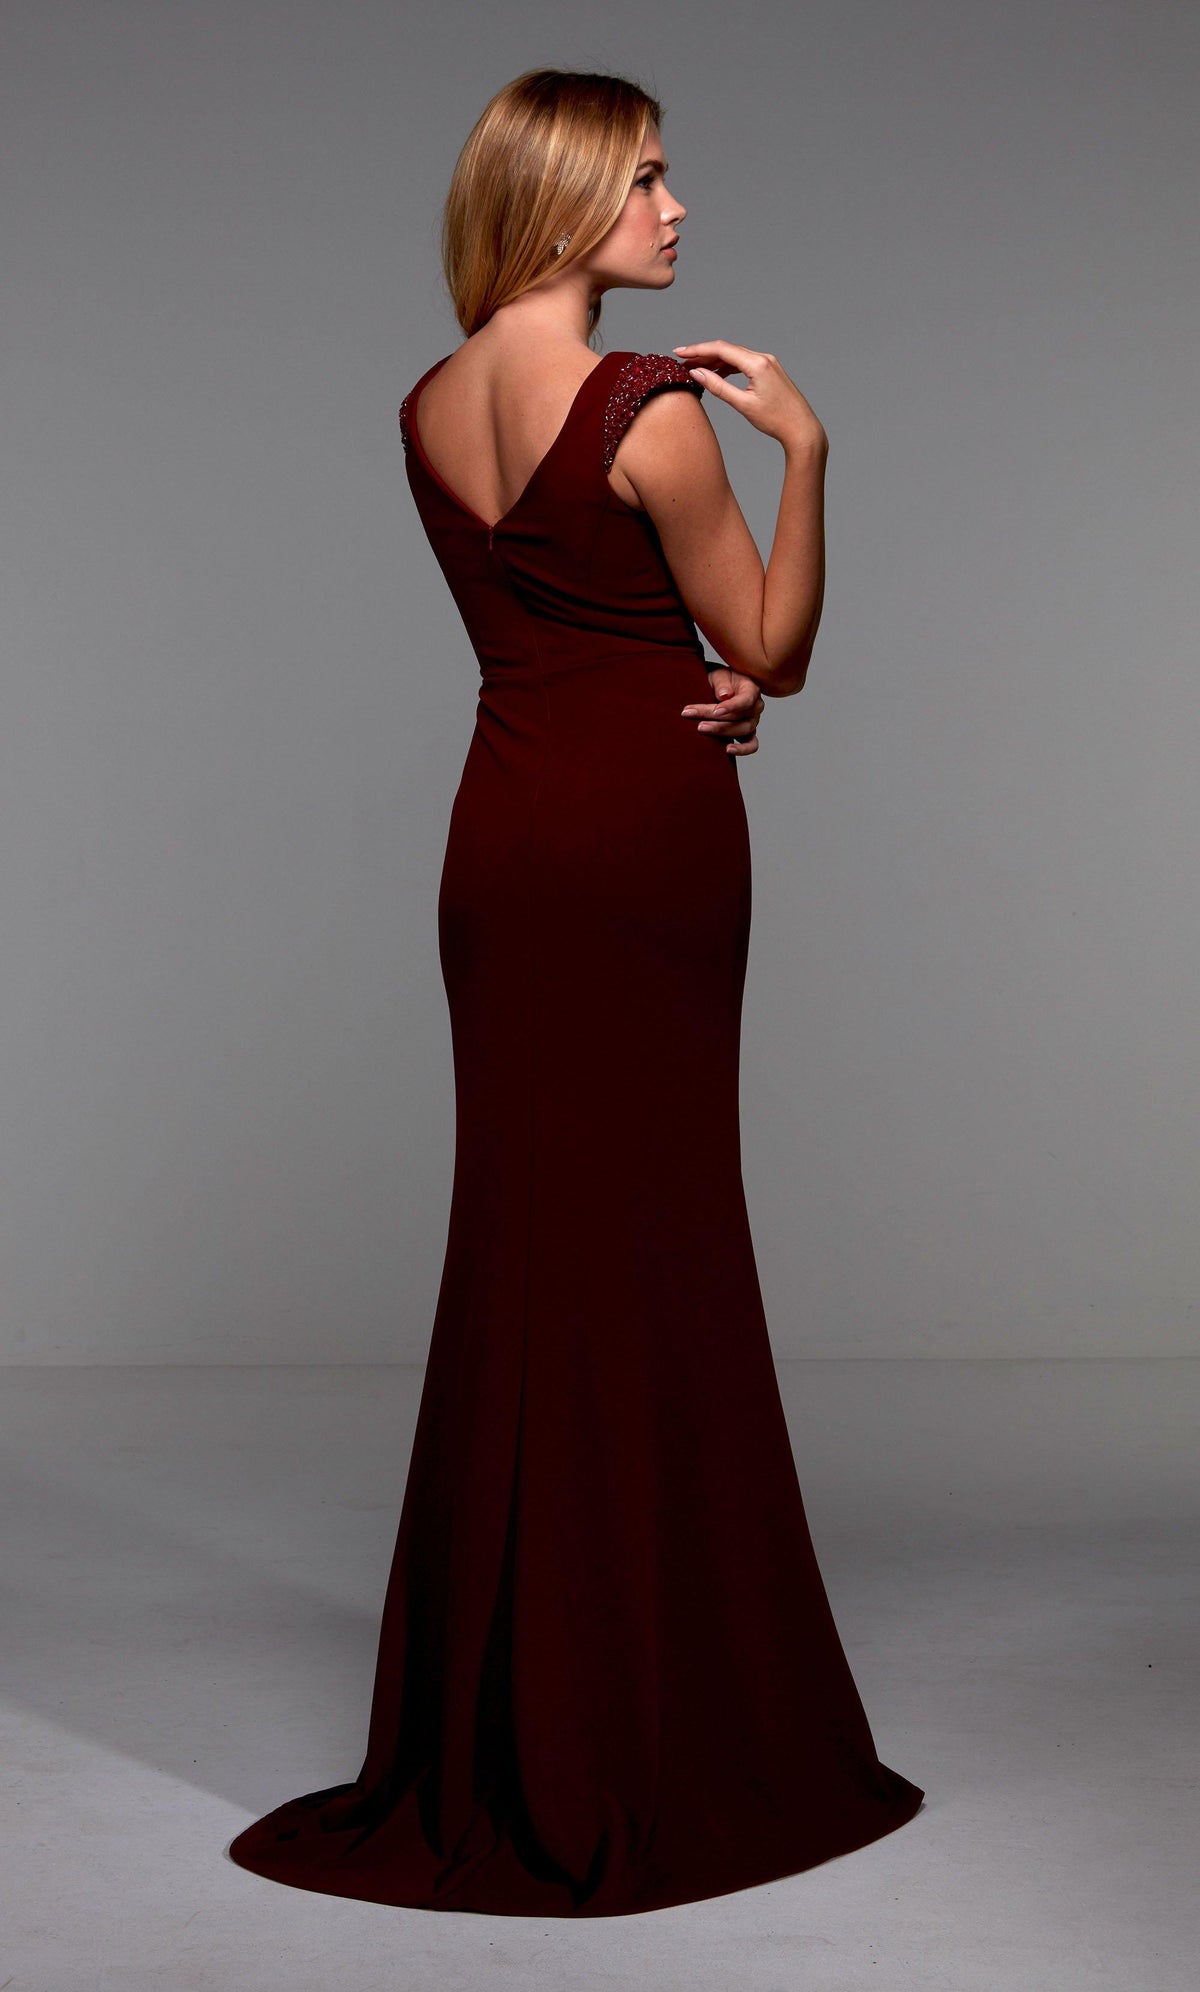 Burgundy long evening dress with beaded capped sleeves, a V shaped back, and train